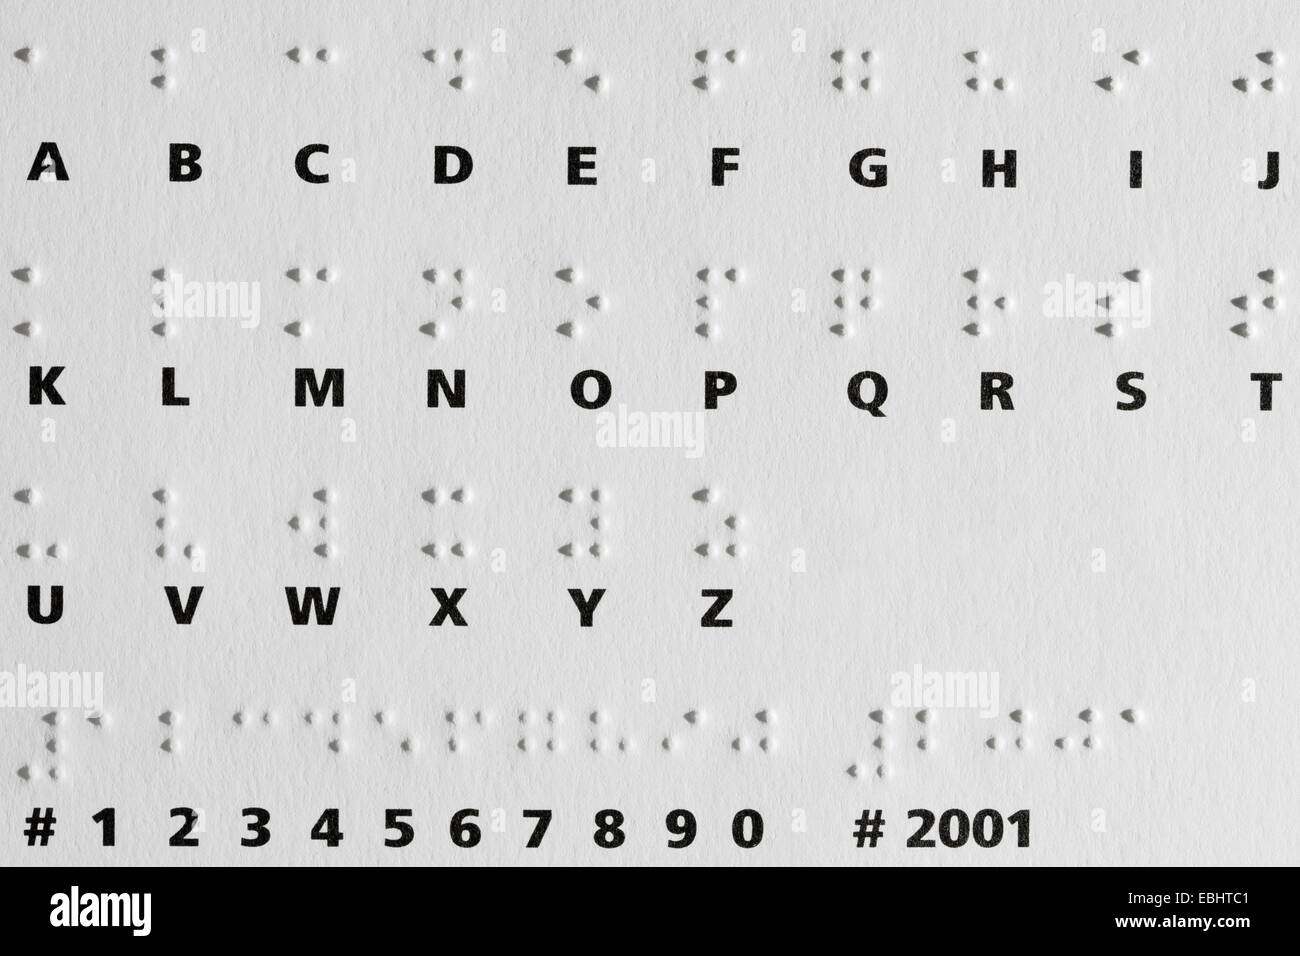 Shadows from raised dots on a card with the Braille alphabet. The system is widely used by blind people to read and write. Stock Photo